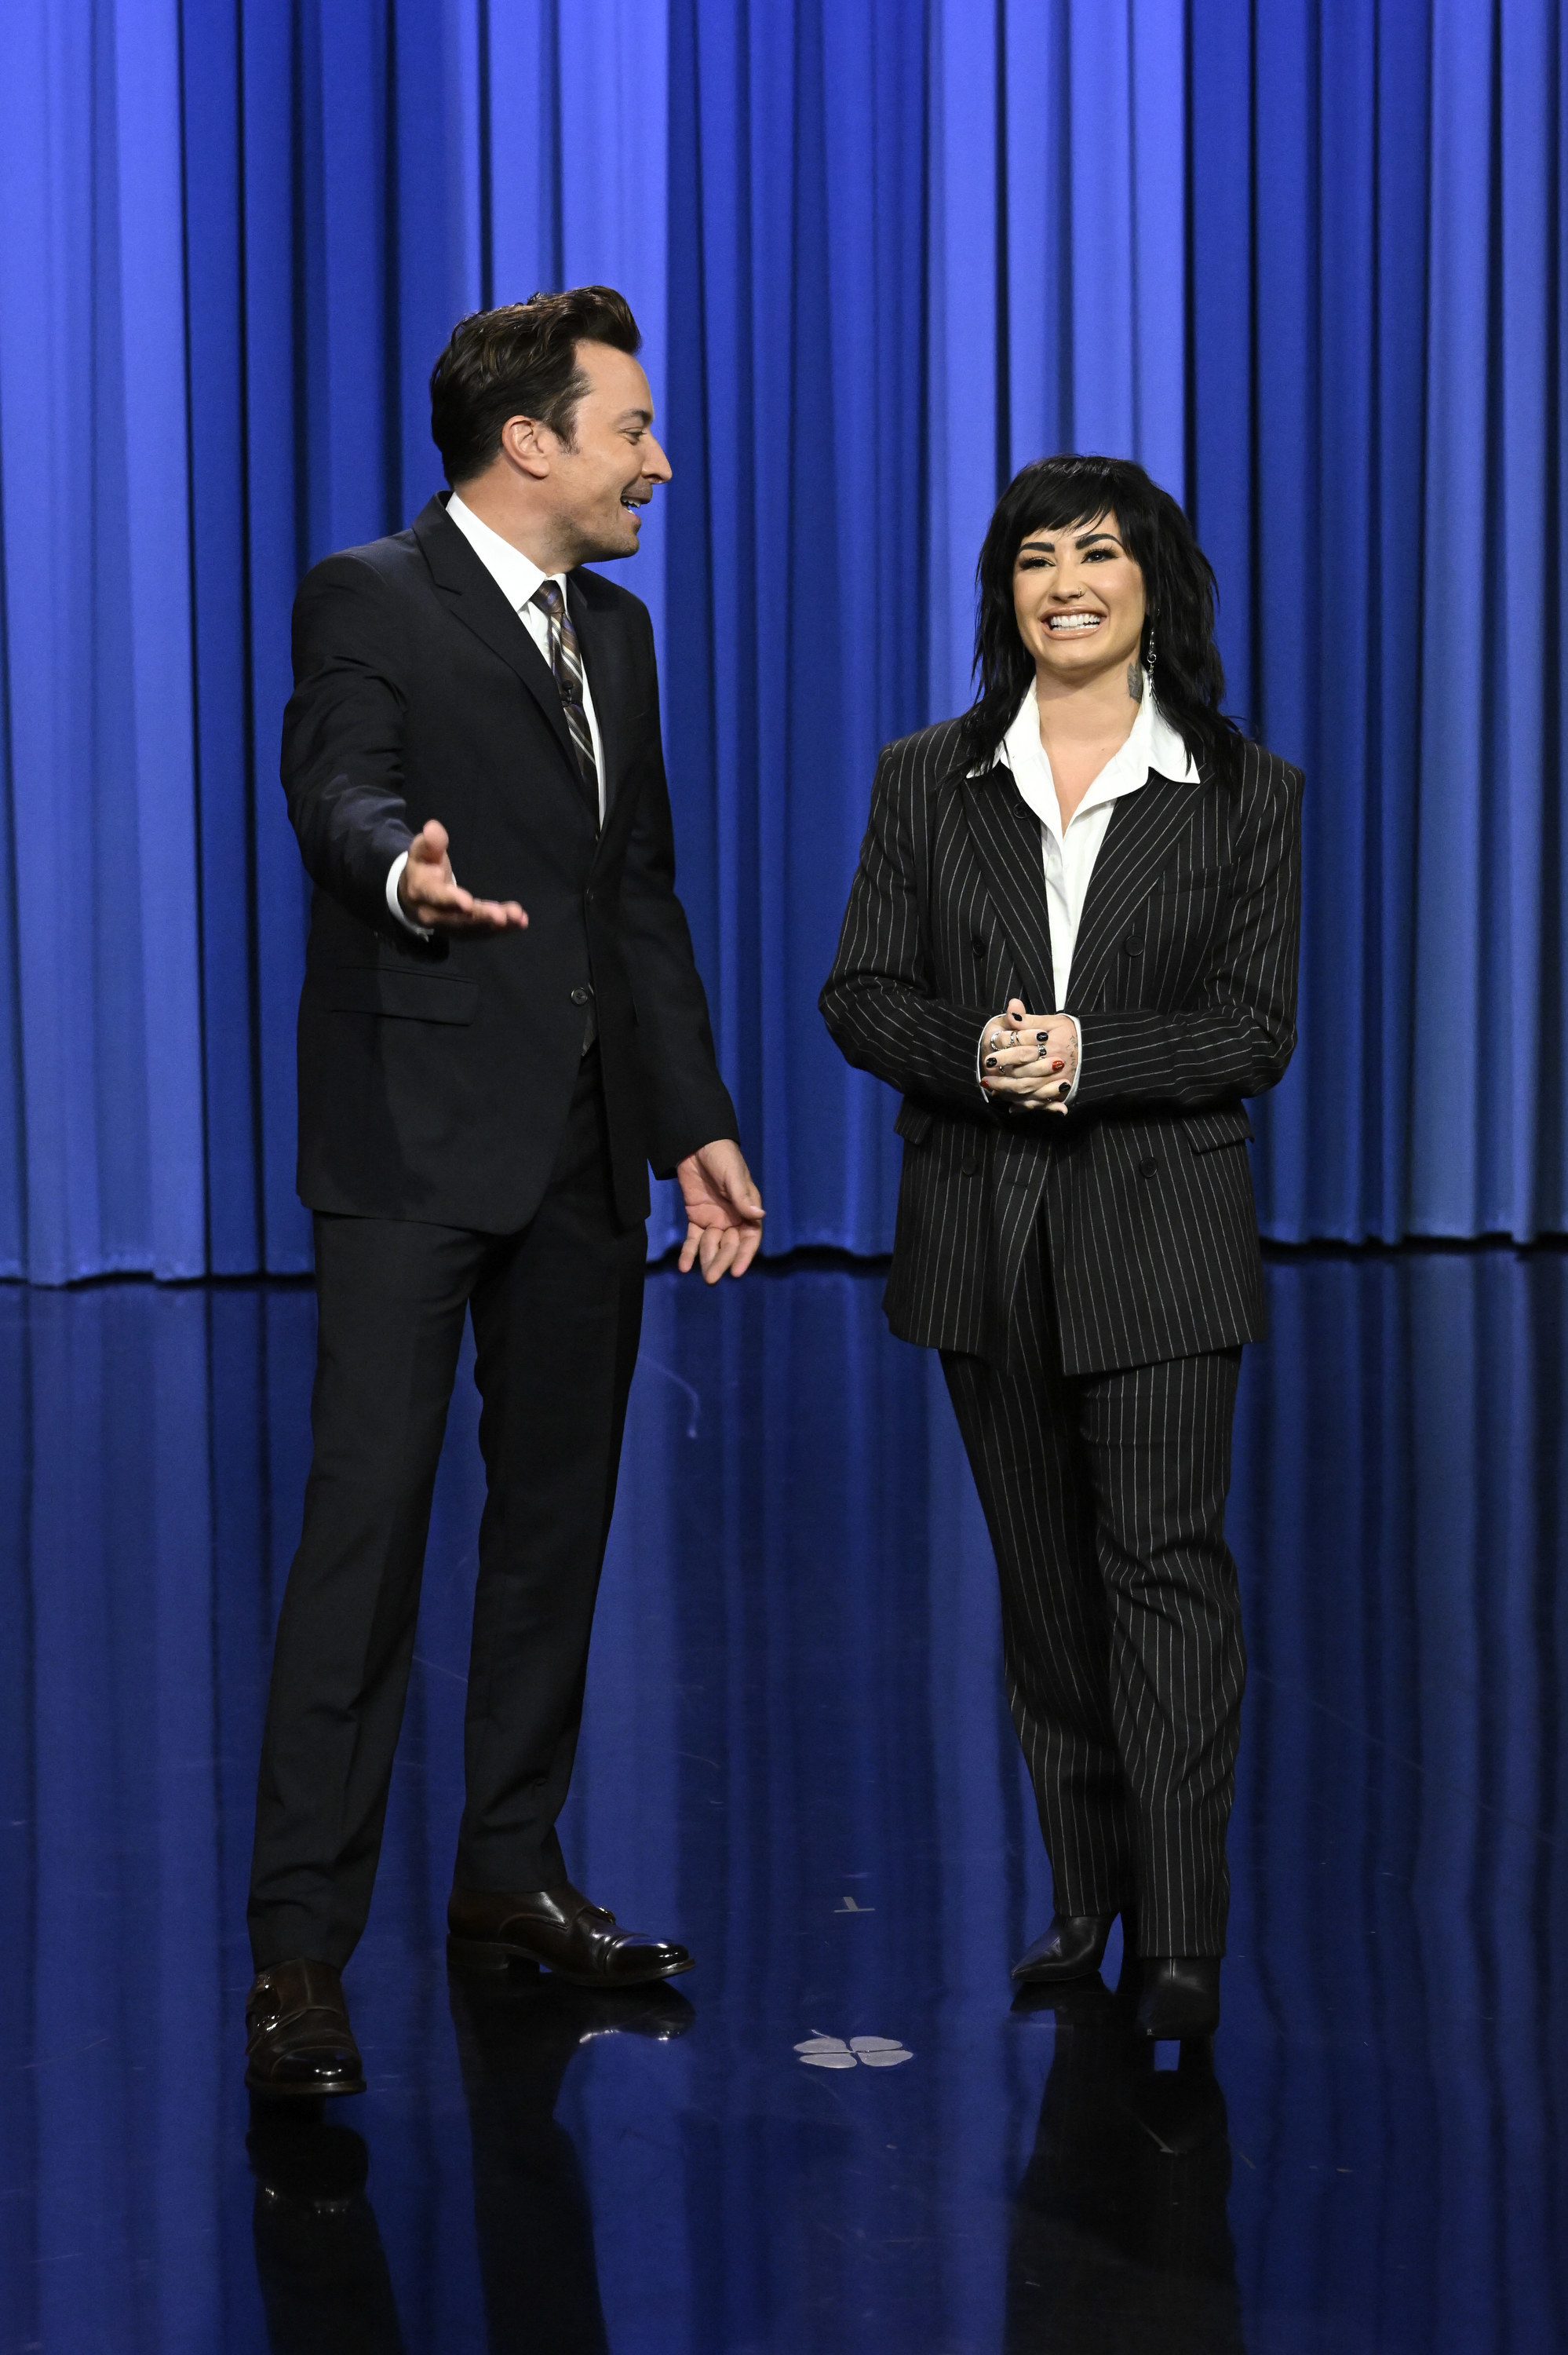 Demi wearing a striped pantsuit and smiling with Jimmy Fallon